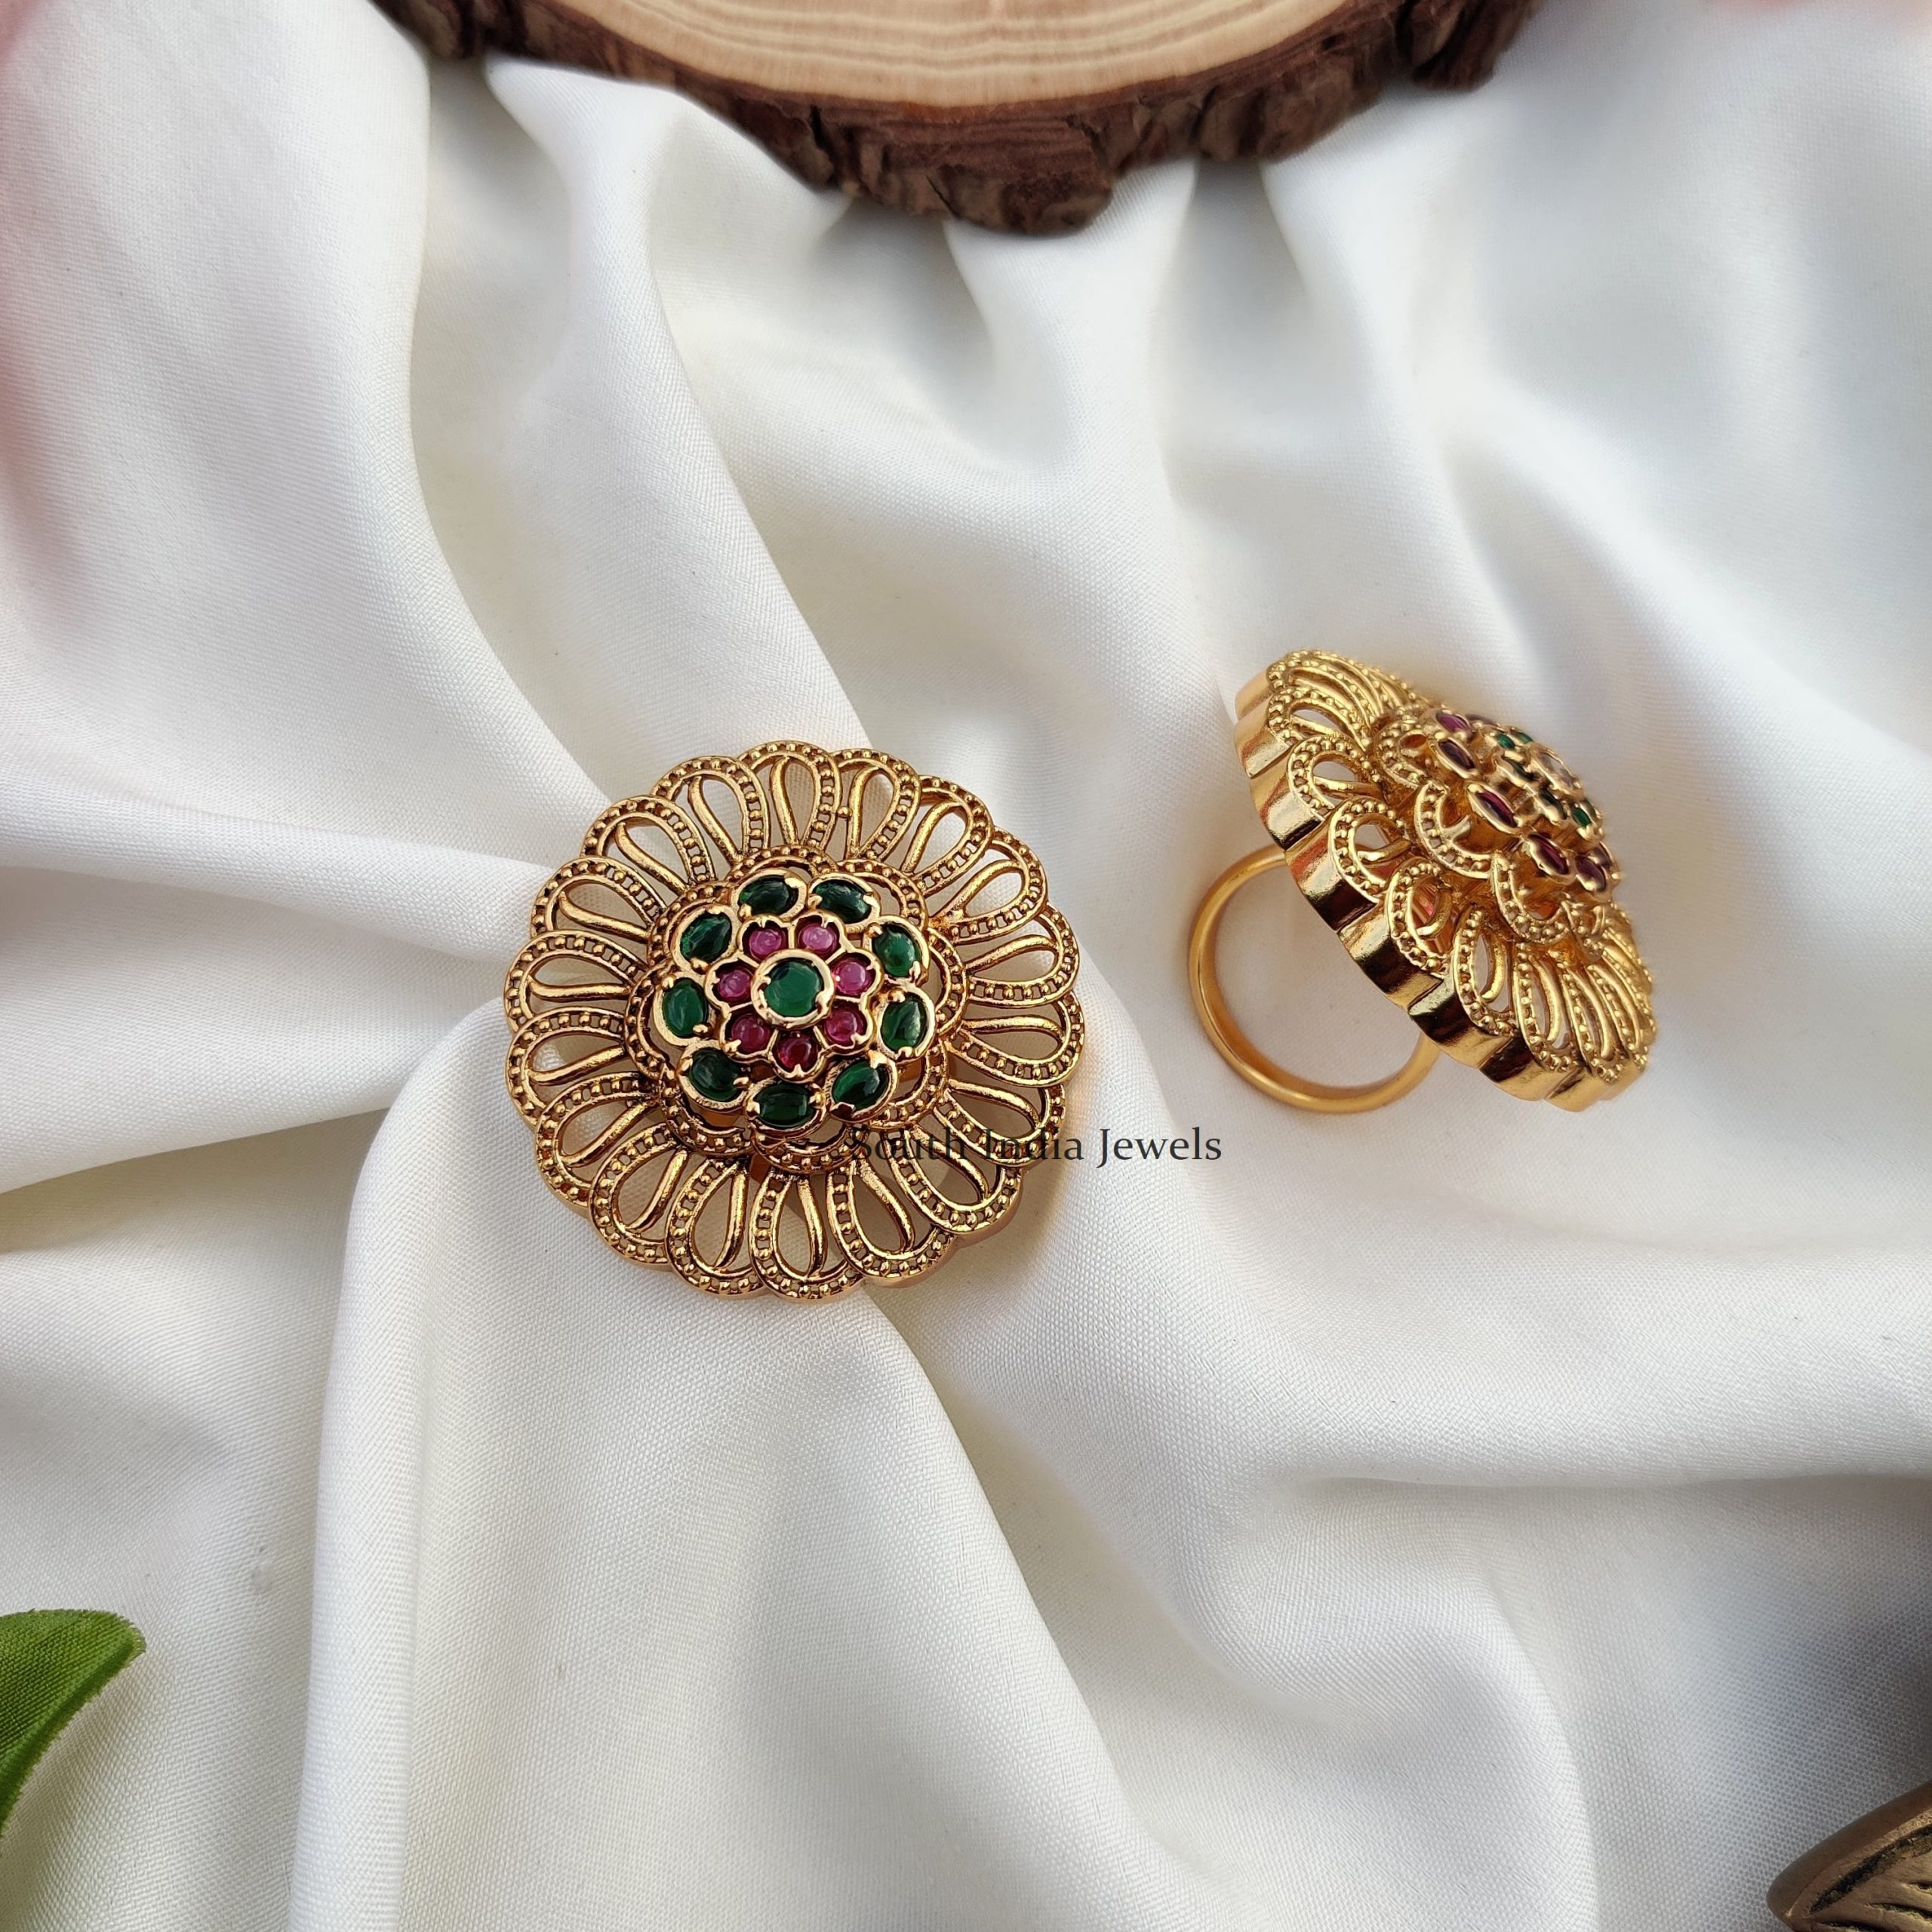 memoir Gold Plated Round Shaped Filigree Fashion Finger Ring Women  Traditional Brass Gold Plated Ring Price in India - Buy memoir Gold Plated  Round Shaped Filigree Fashion Finger Ring Women Traditional Brass